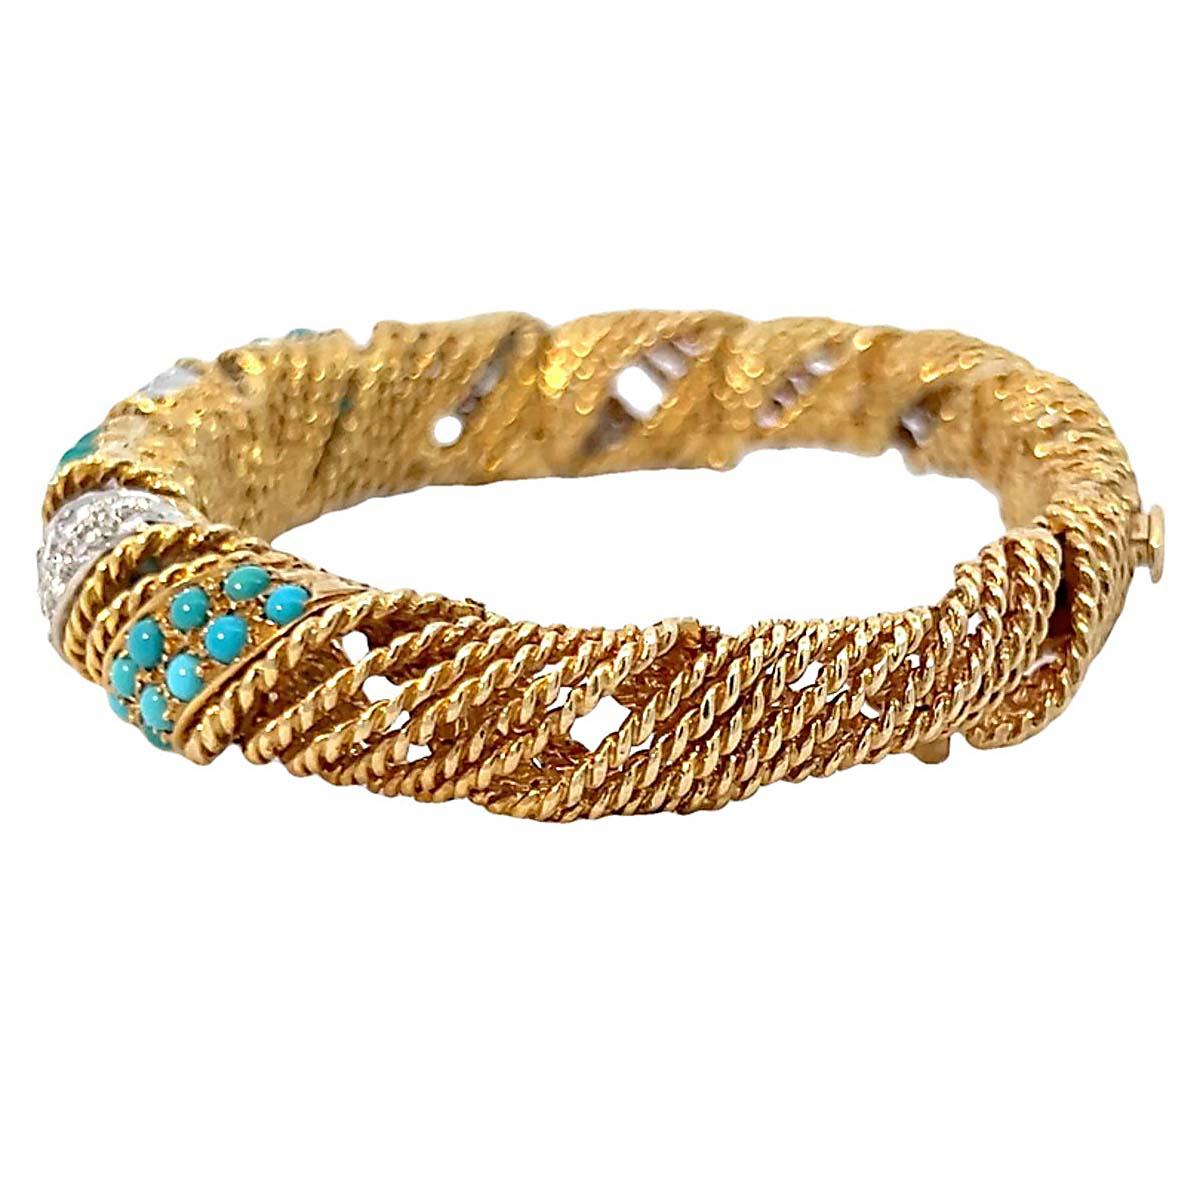 Vintage Turquoise and Dimond 18k Cuff Bracelet In Excellent Condition For Sale In Beverly Hills, CA